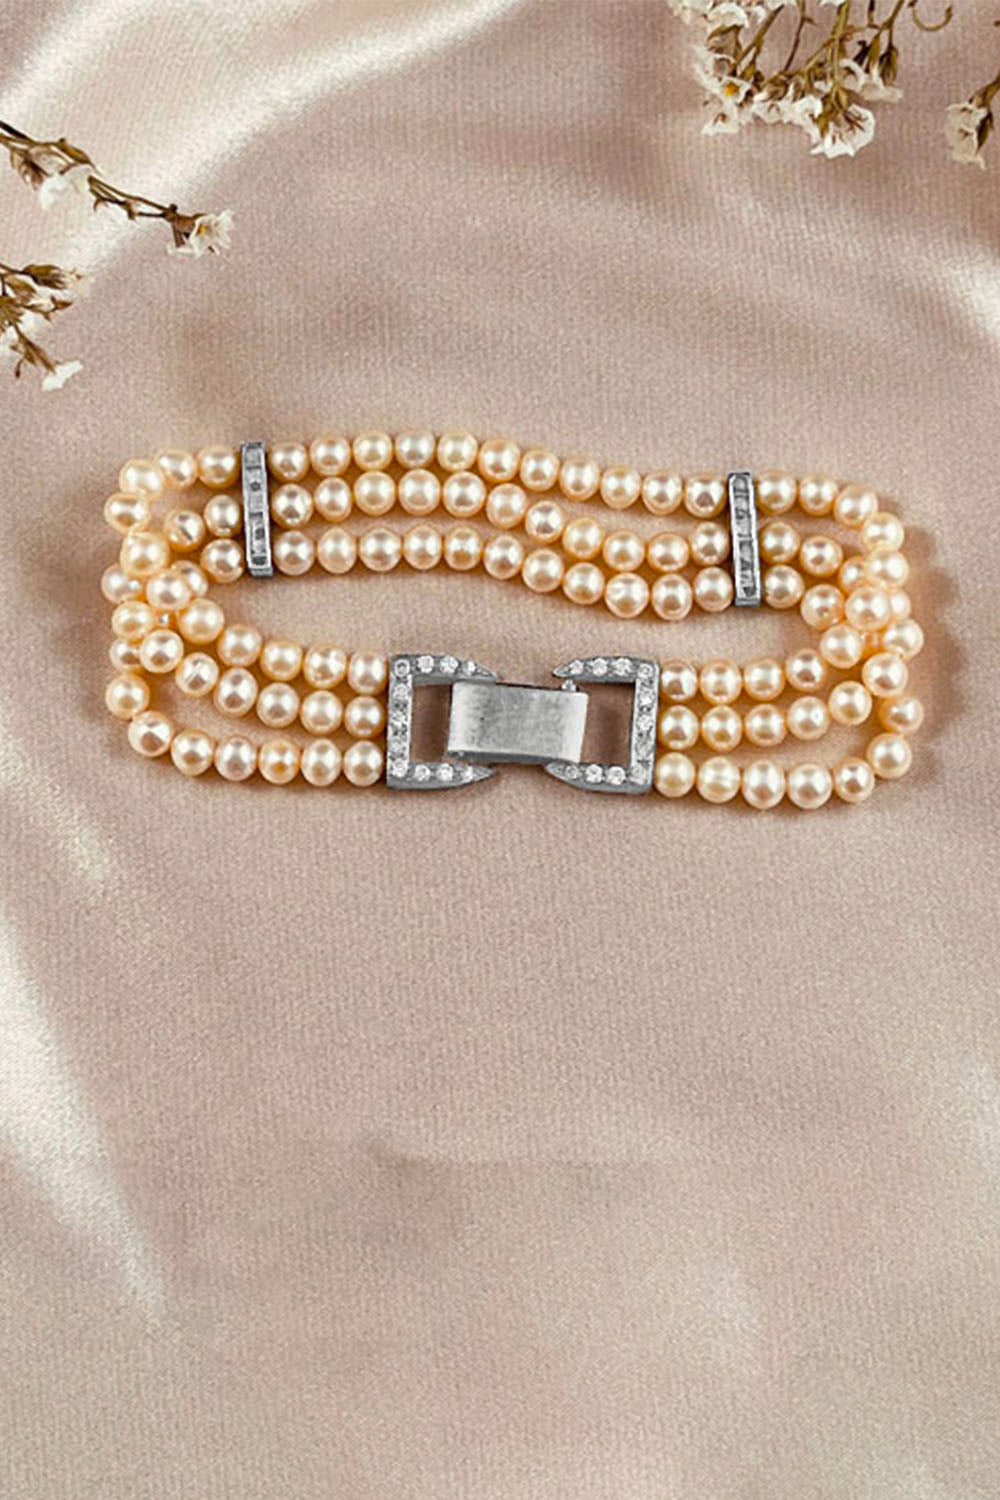 Sivalya Grace Layered Pearls Bracelet Sterling Silver - Peach